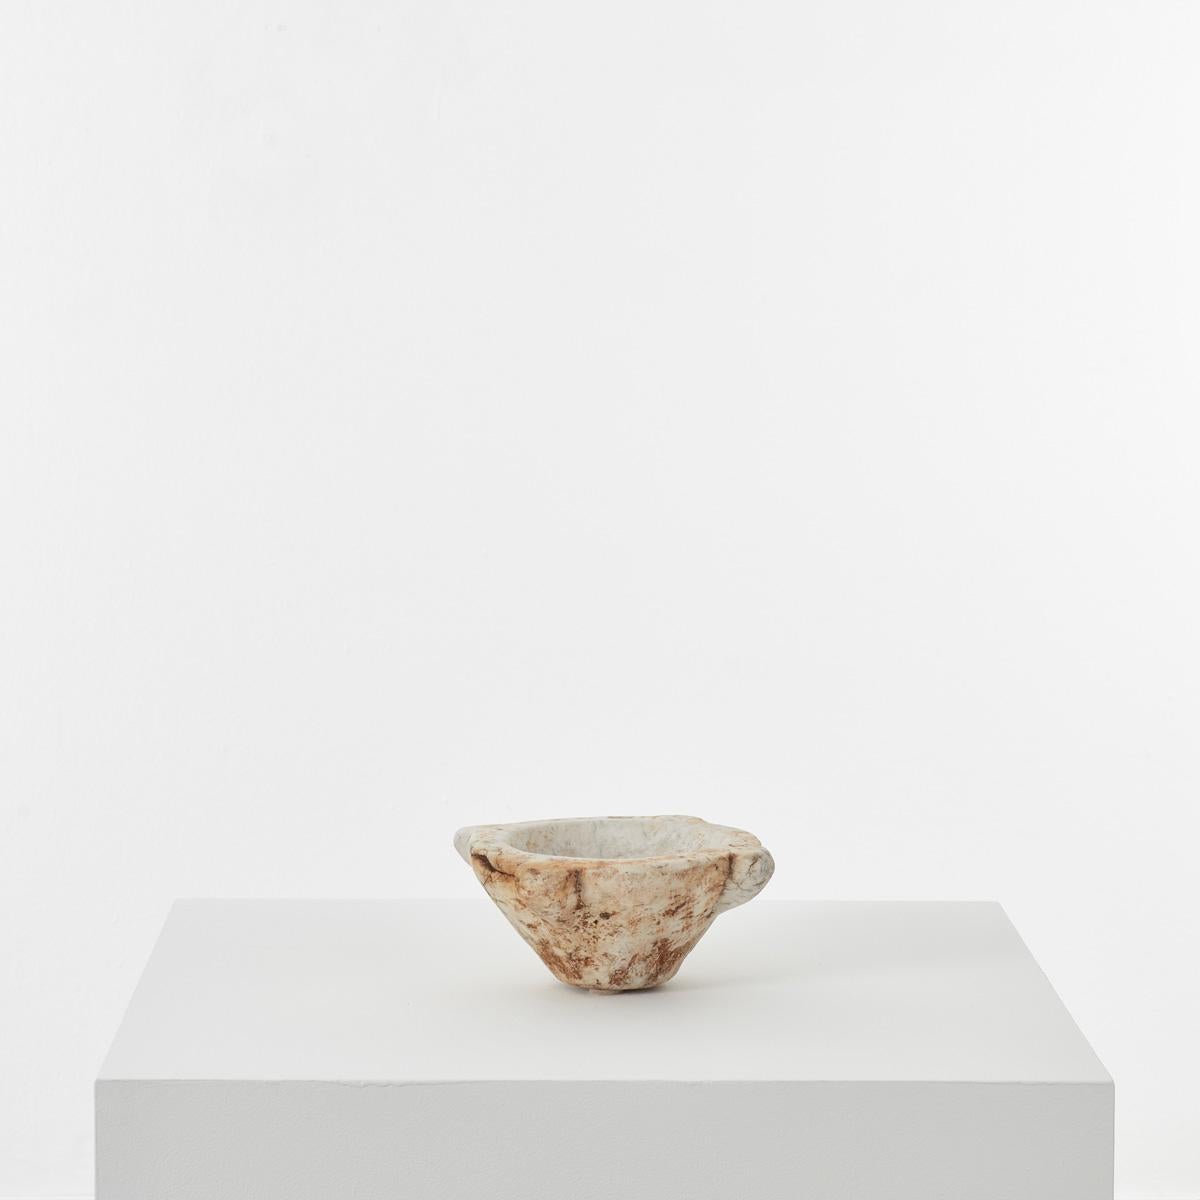 This ancient marble mortar has a rather mysterious aura about it. It is hand-sculpted from a single piece of stone, with beautiful ageing over time. Perhaps the most distinctive element of this piece is the chisel marks apparent on close inspection.